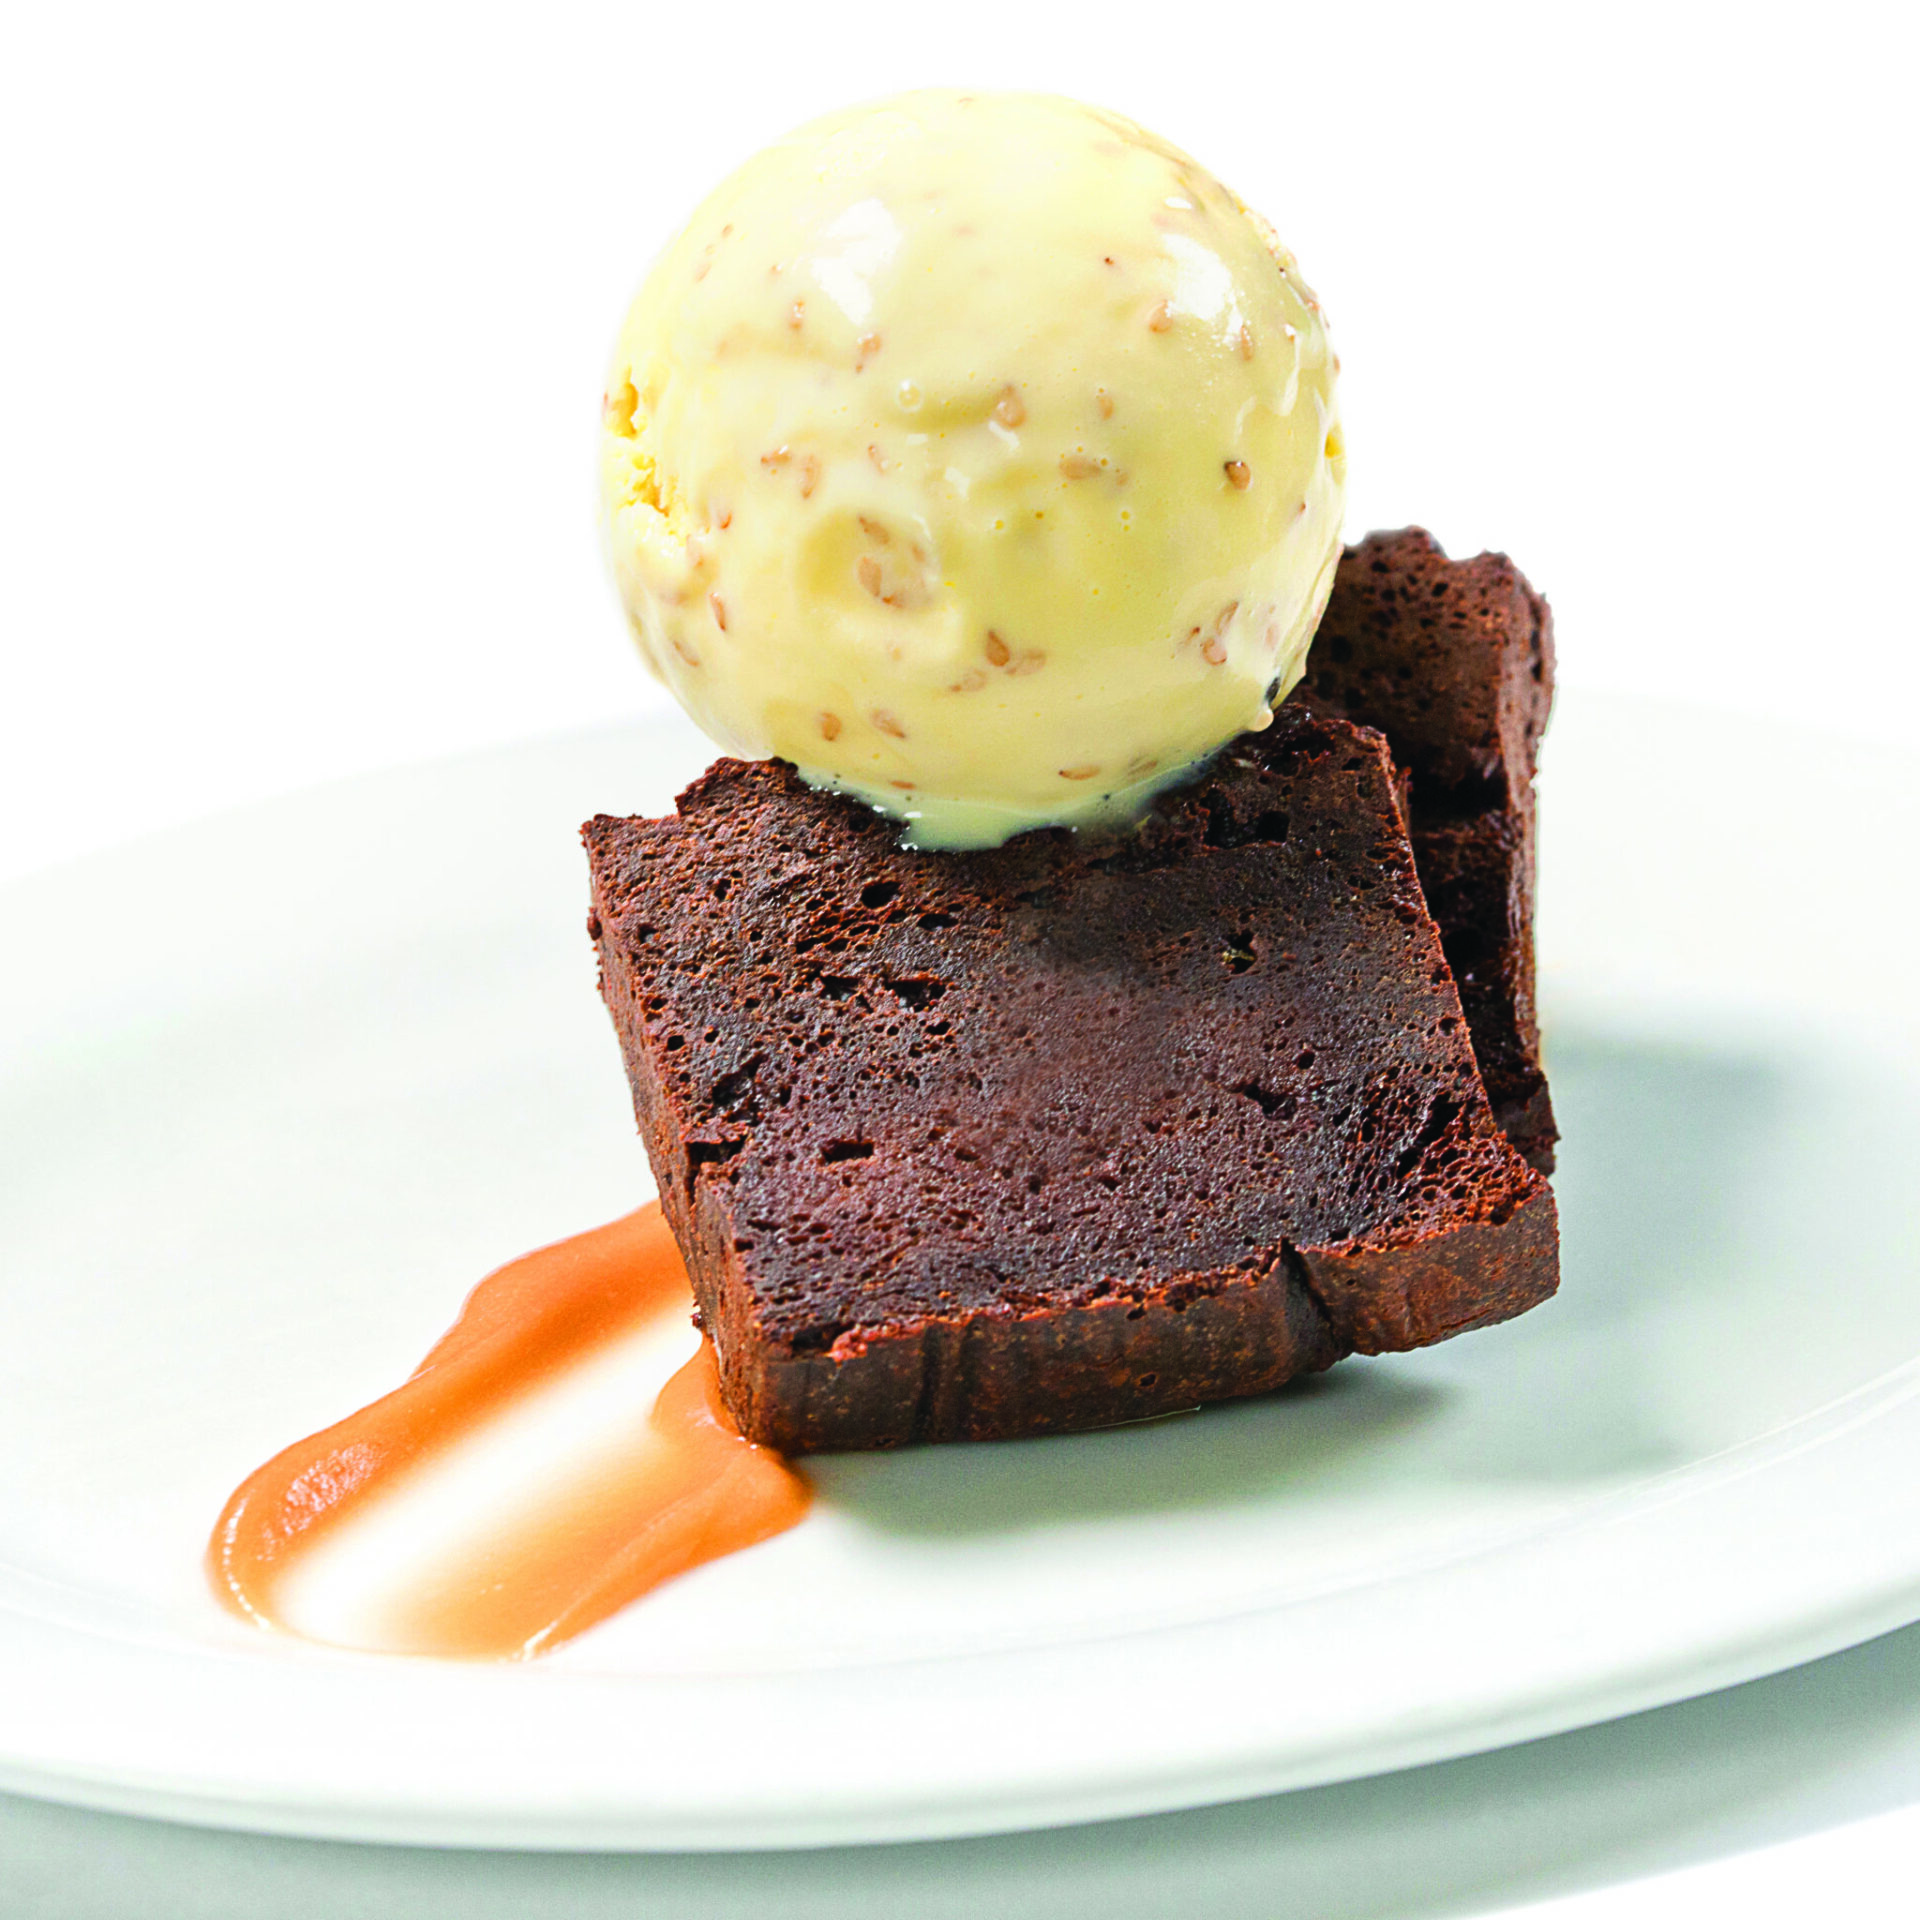 Chocolate-Bread-Pudding-with-Benne-Seed-Ice-Cream_Photo-by-Neil-Boyd.jpg